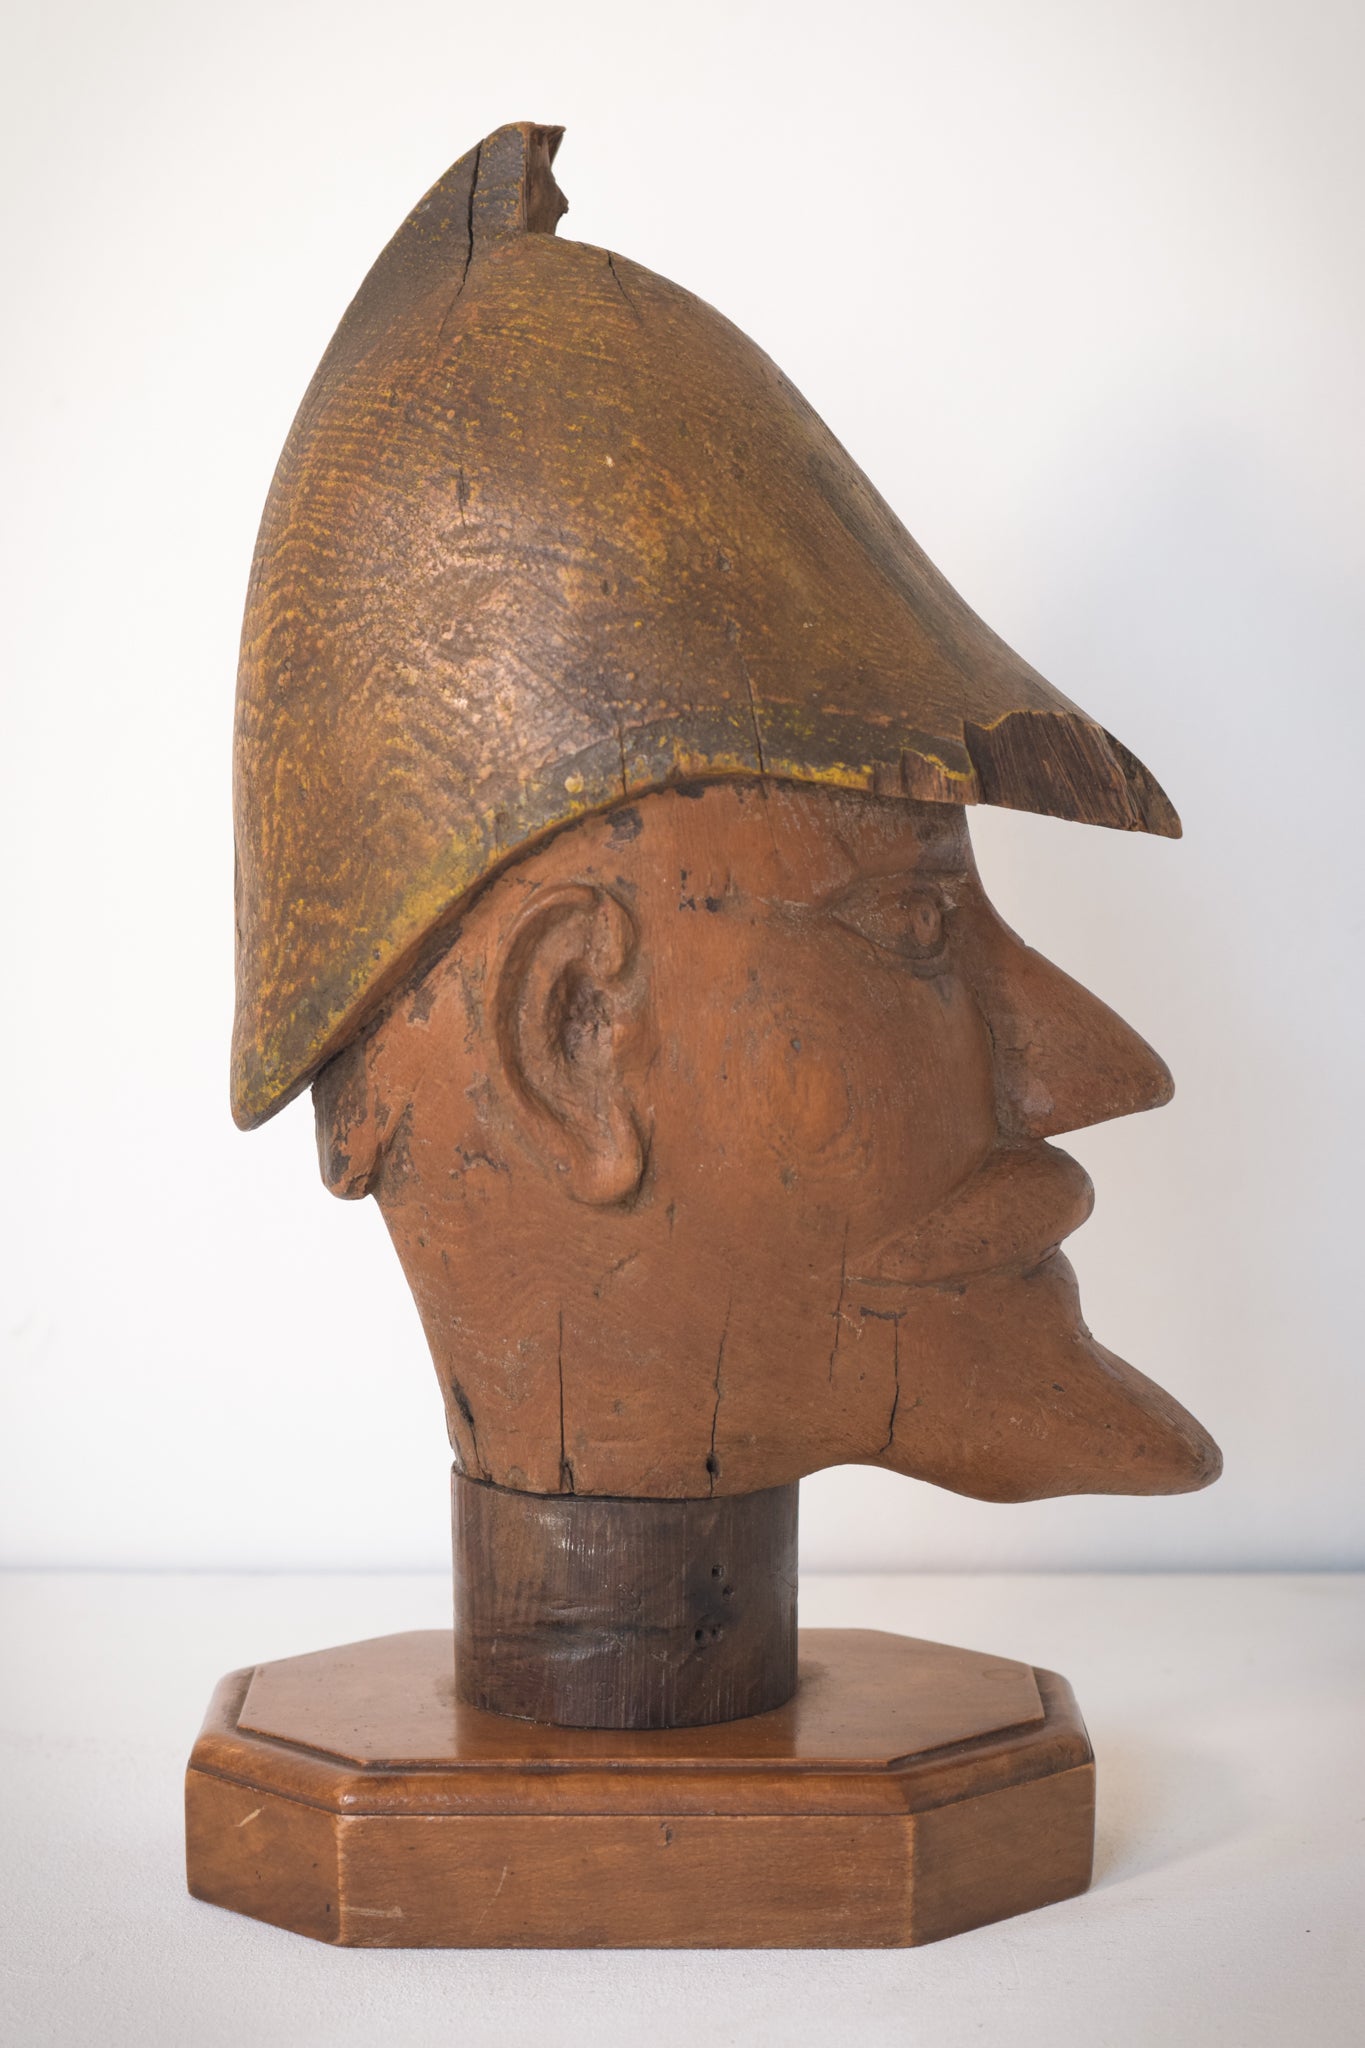 Hand-carved Wooden Head of a Soldier